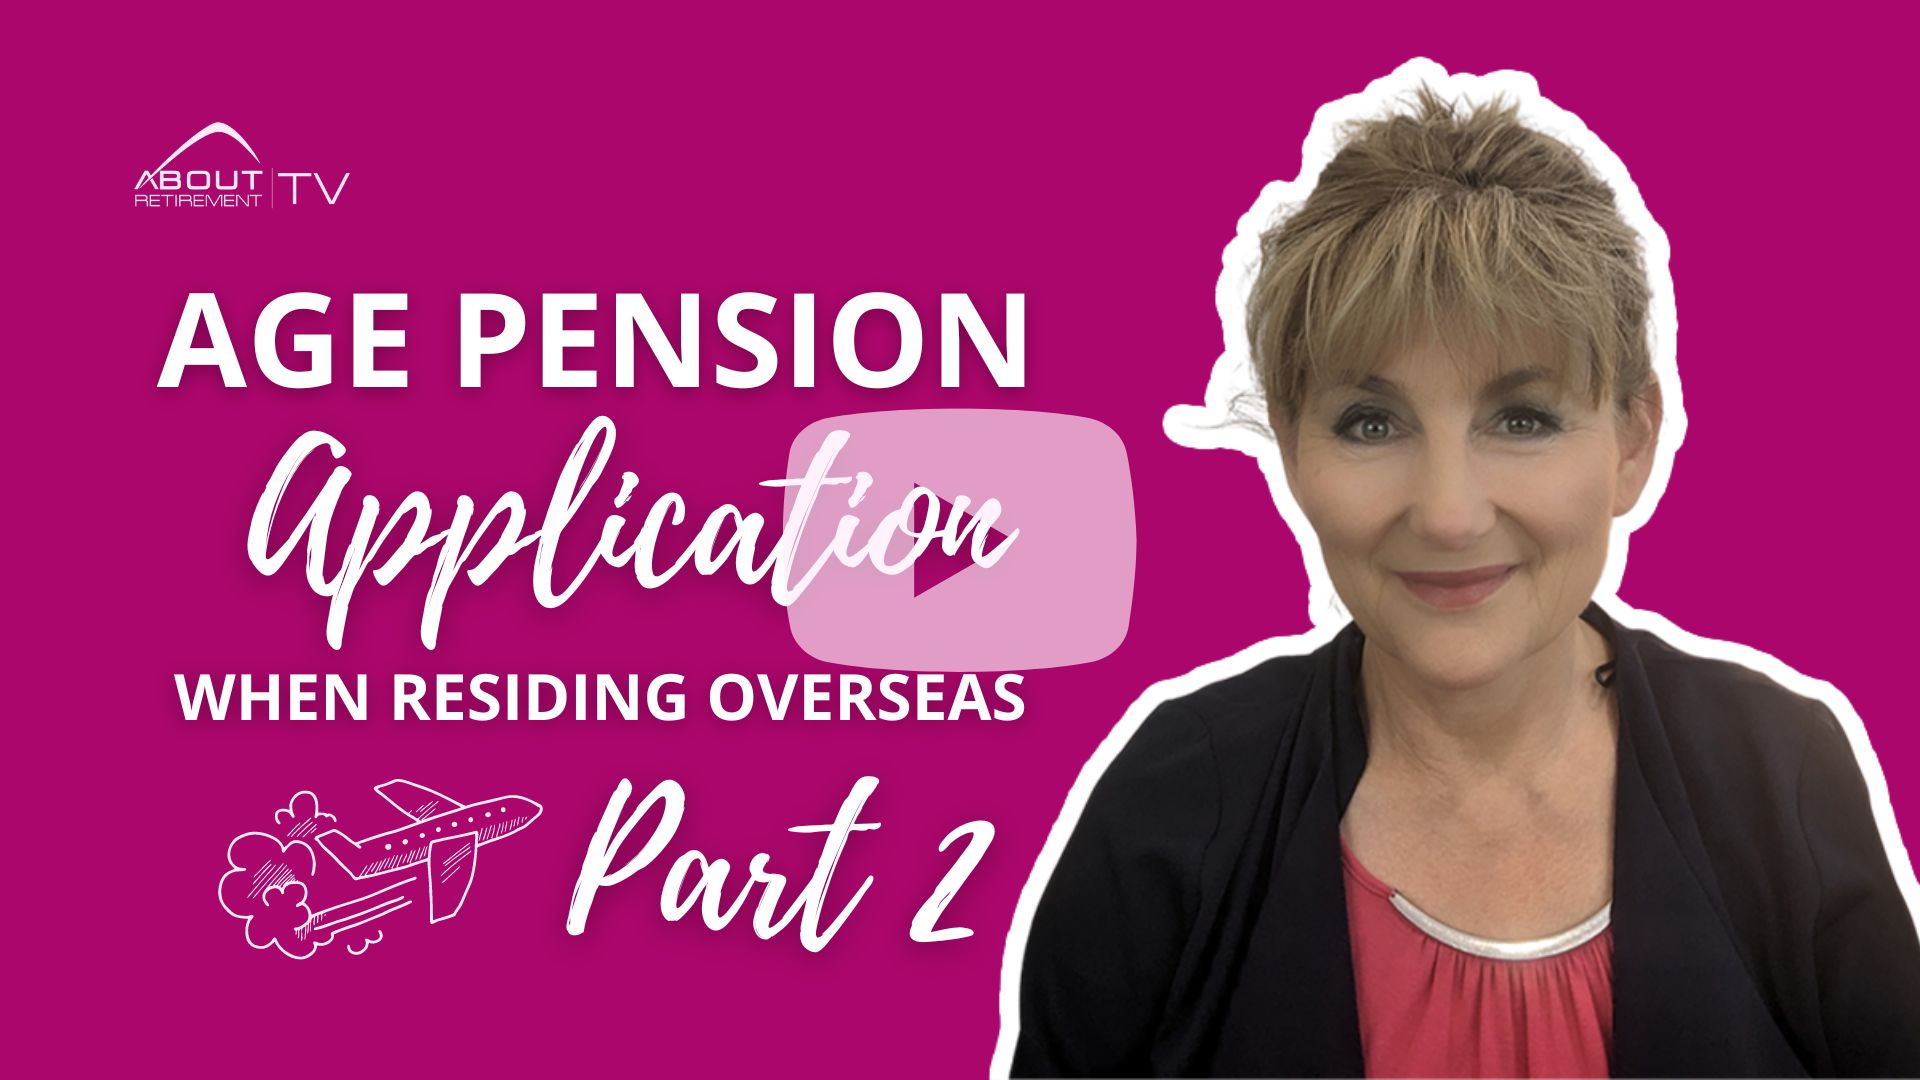 Applying-for-Age-Pension-when-living-overseas-in-a-country-that-does-not-have-Social-Security-Agreement-with-Australia